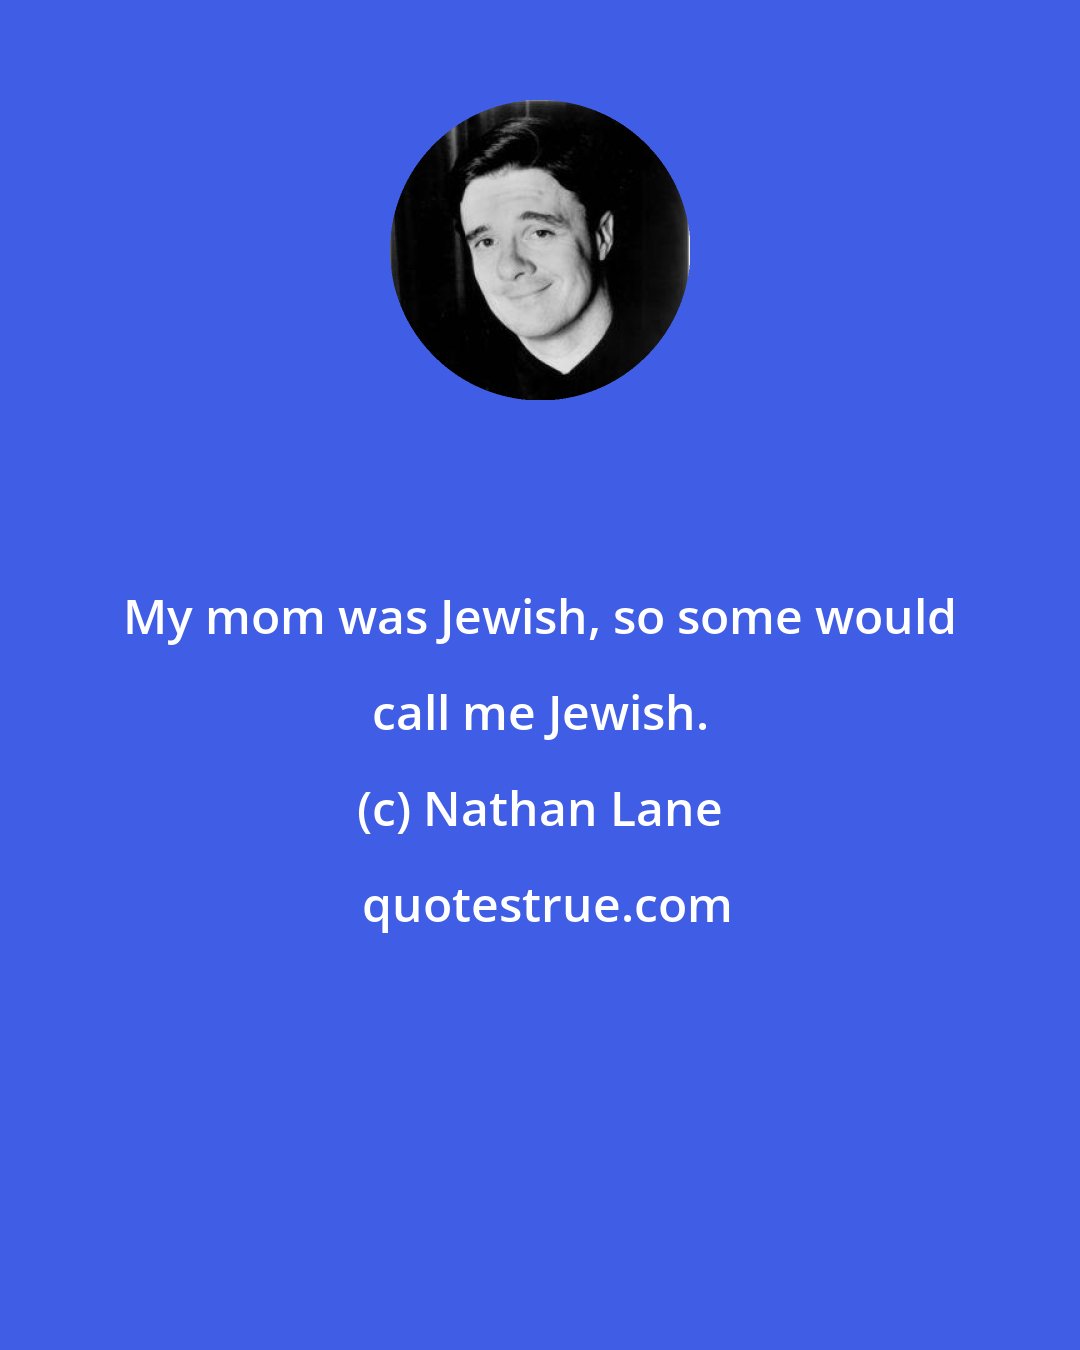 Nathan Lane: My mom was Jewish, so some would call me Jewish.